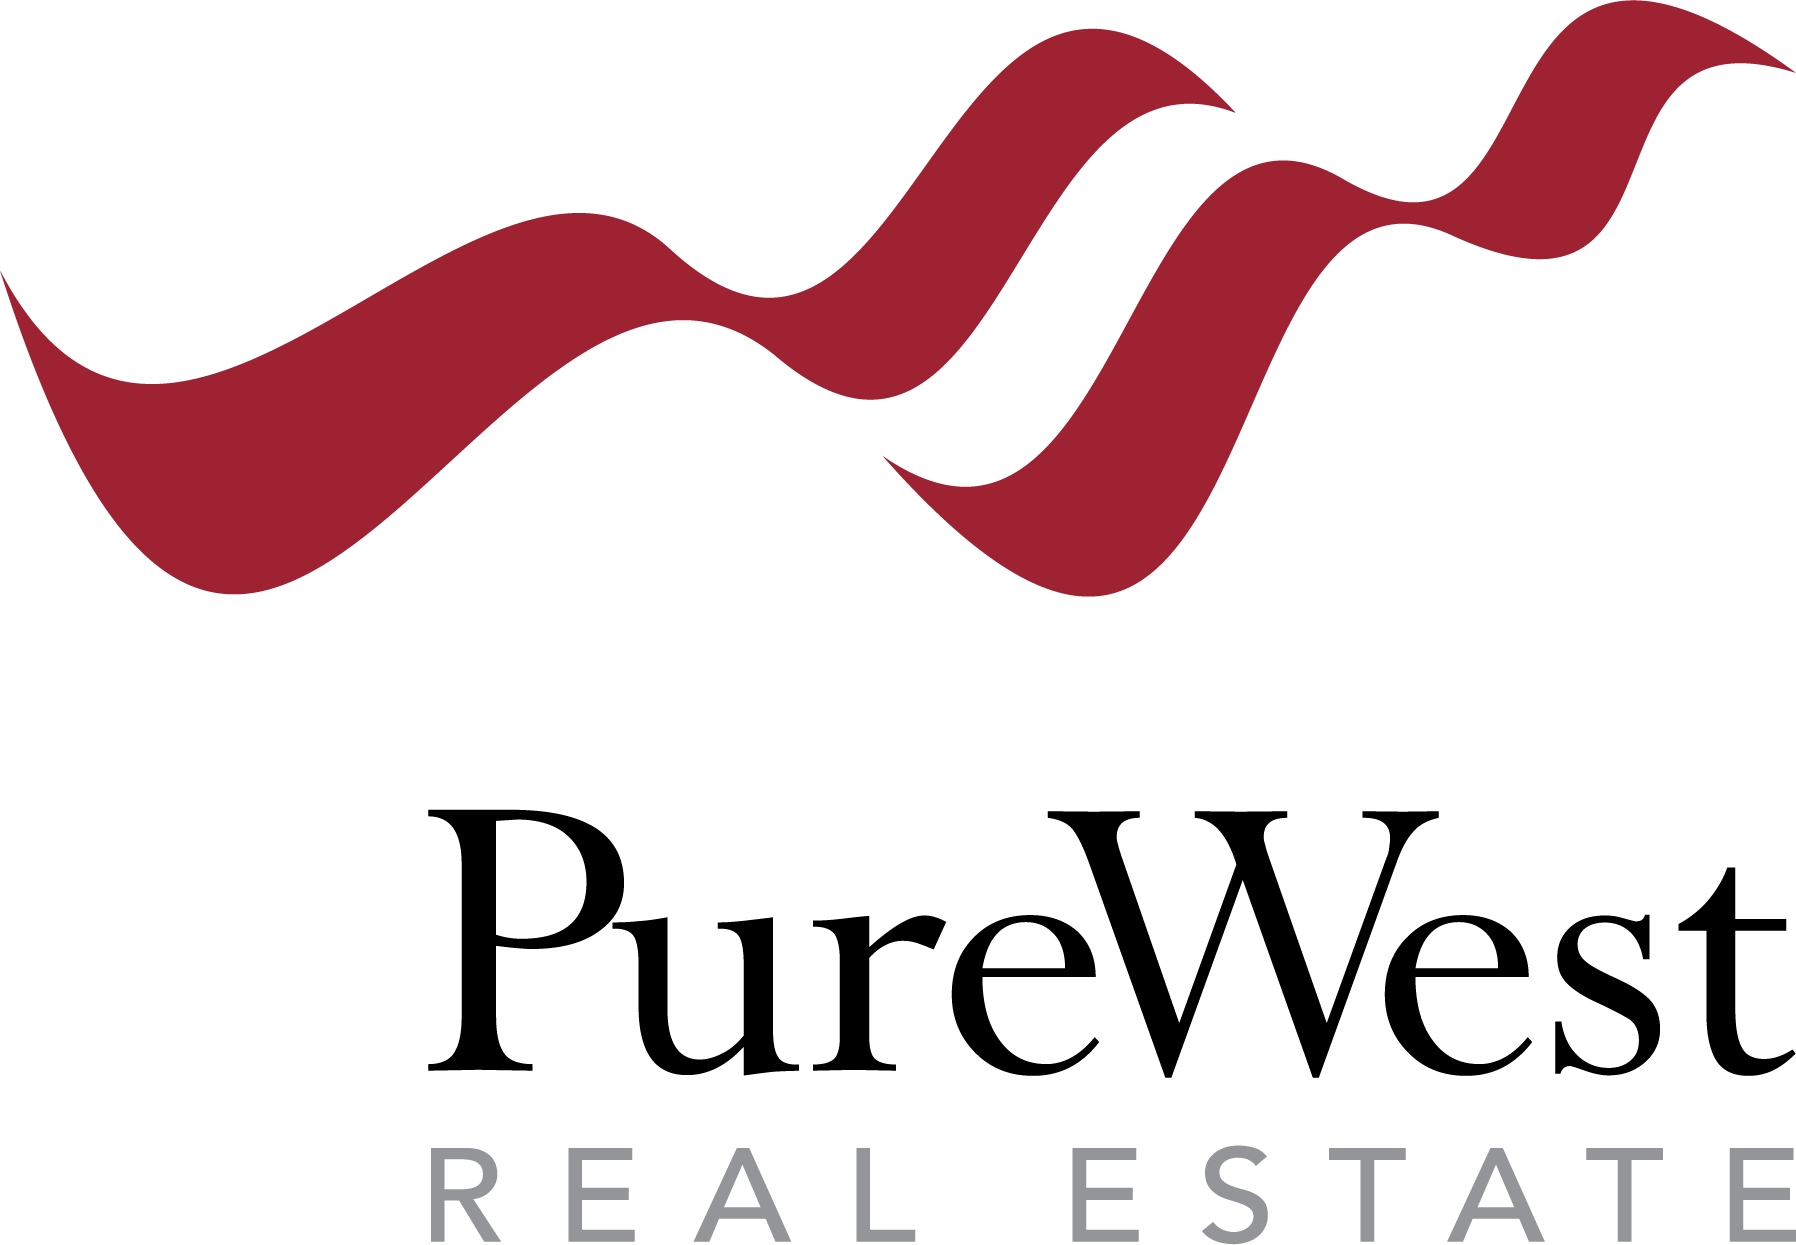 Mary Wheeler - Pure West Real Estate Logo